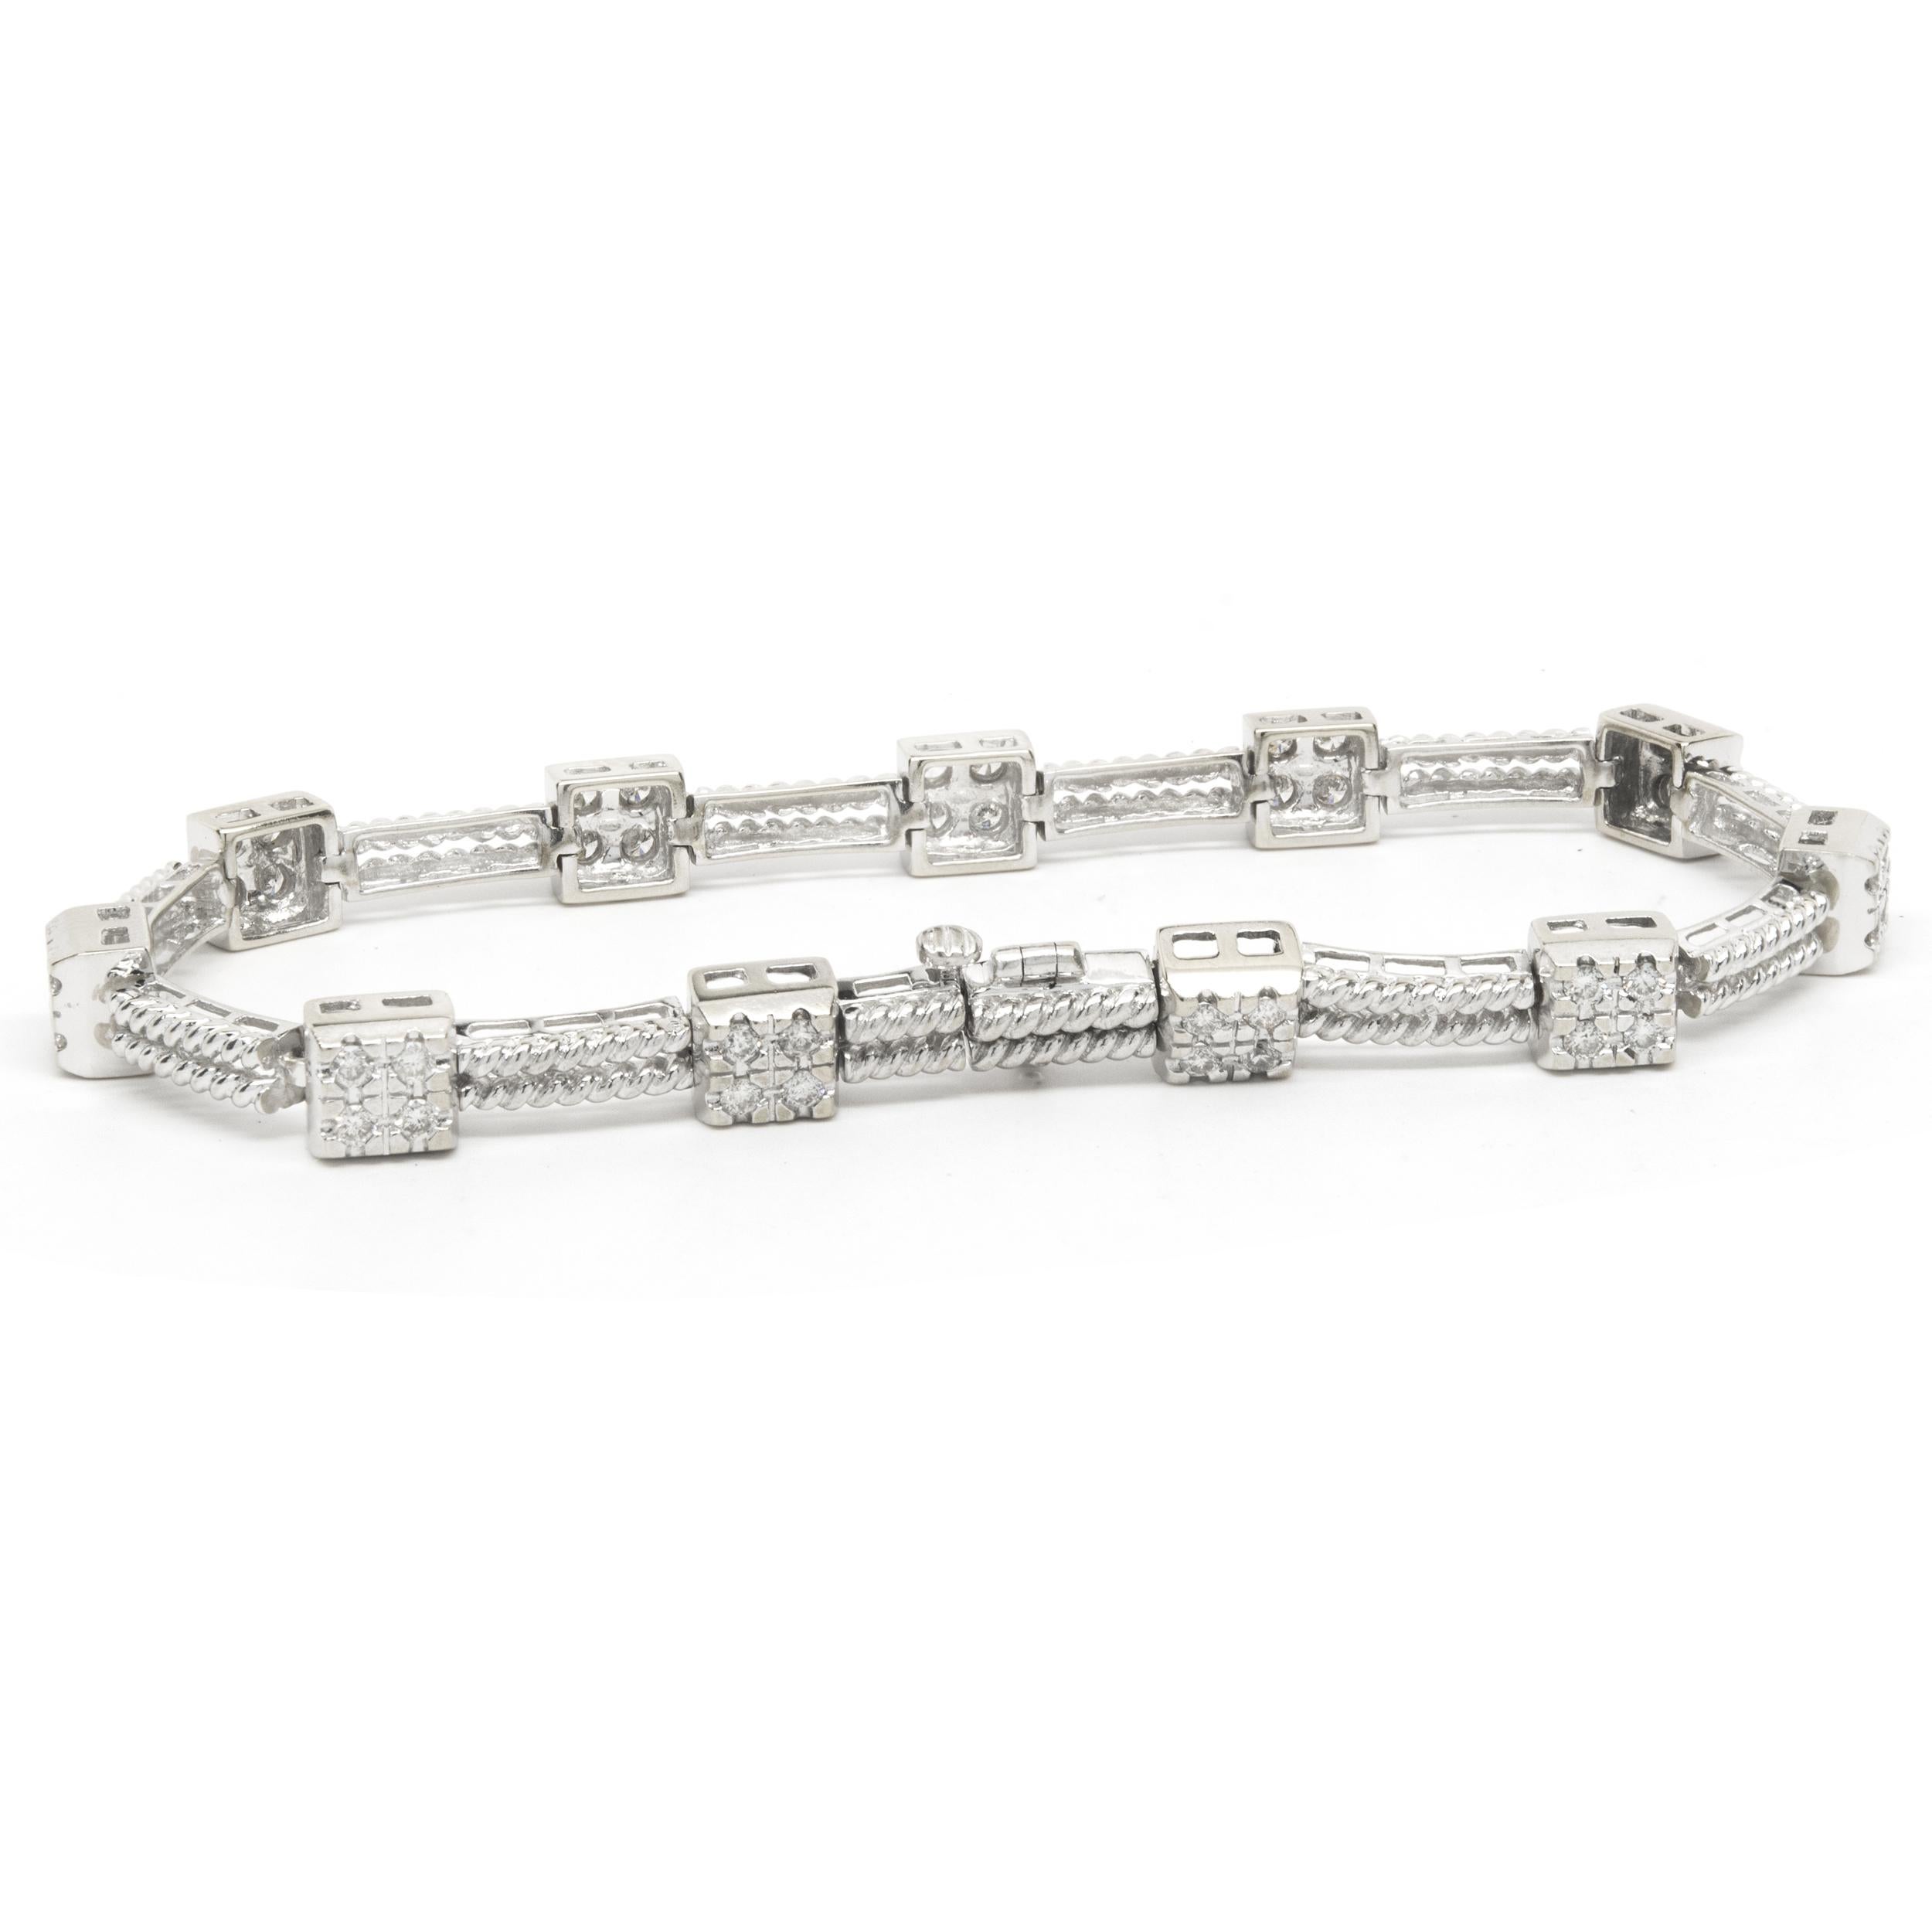 Designer: custom
Material: 14K white gold
Diamond: 44 round brilliant= 1.00cttw
Color: H
Clarity: SI1
Dimensions: bracelet will fit up to a 6.75-inch wrist
Weight: 14.83 grams
